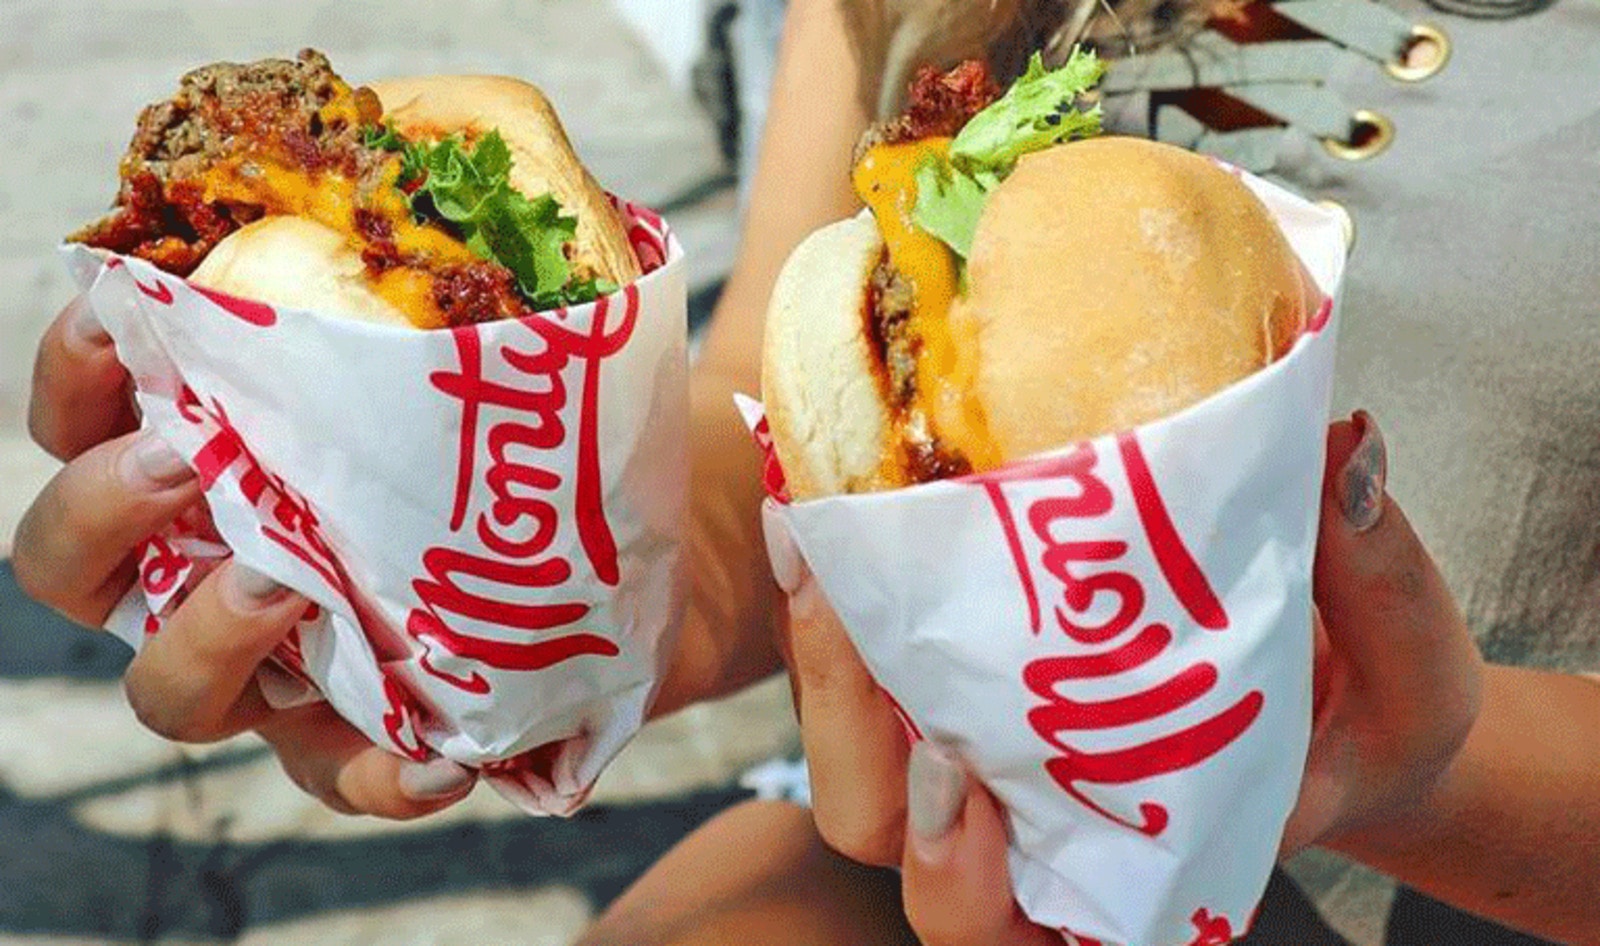 You Can Now Pre-Order Vegan Burgers and Tacos for Coachella